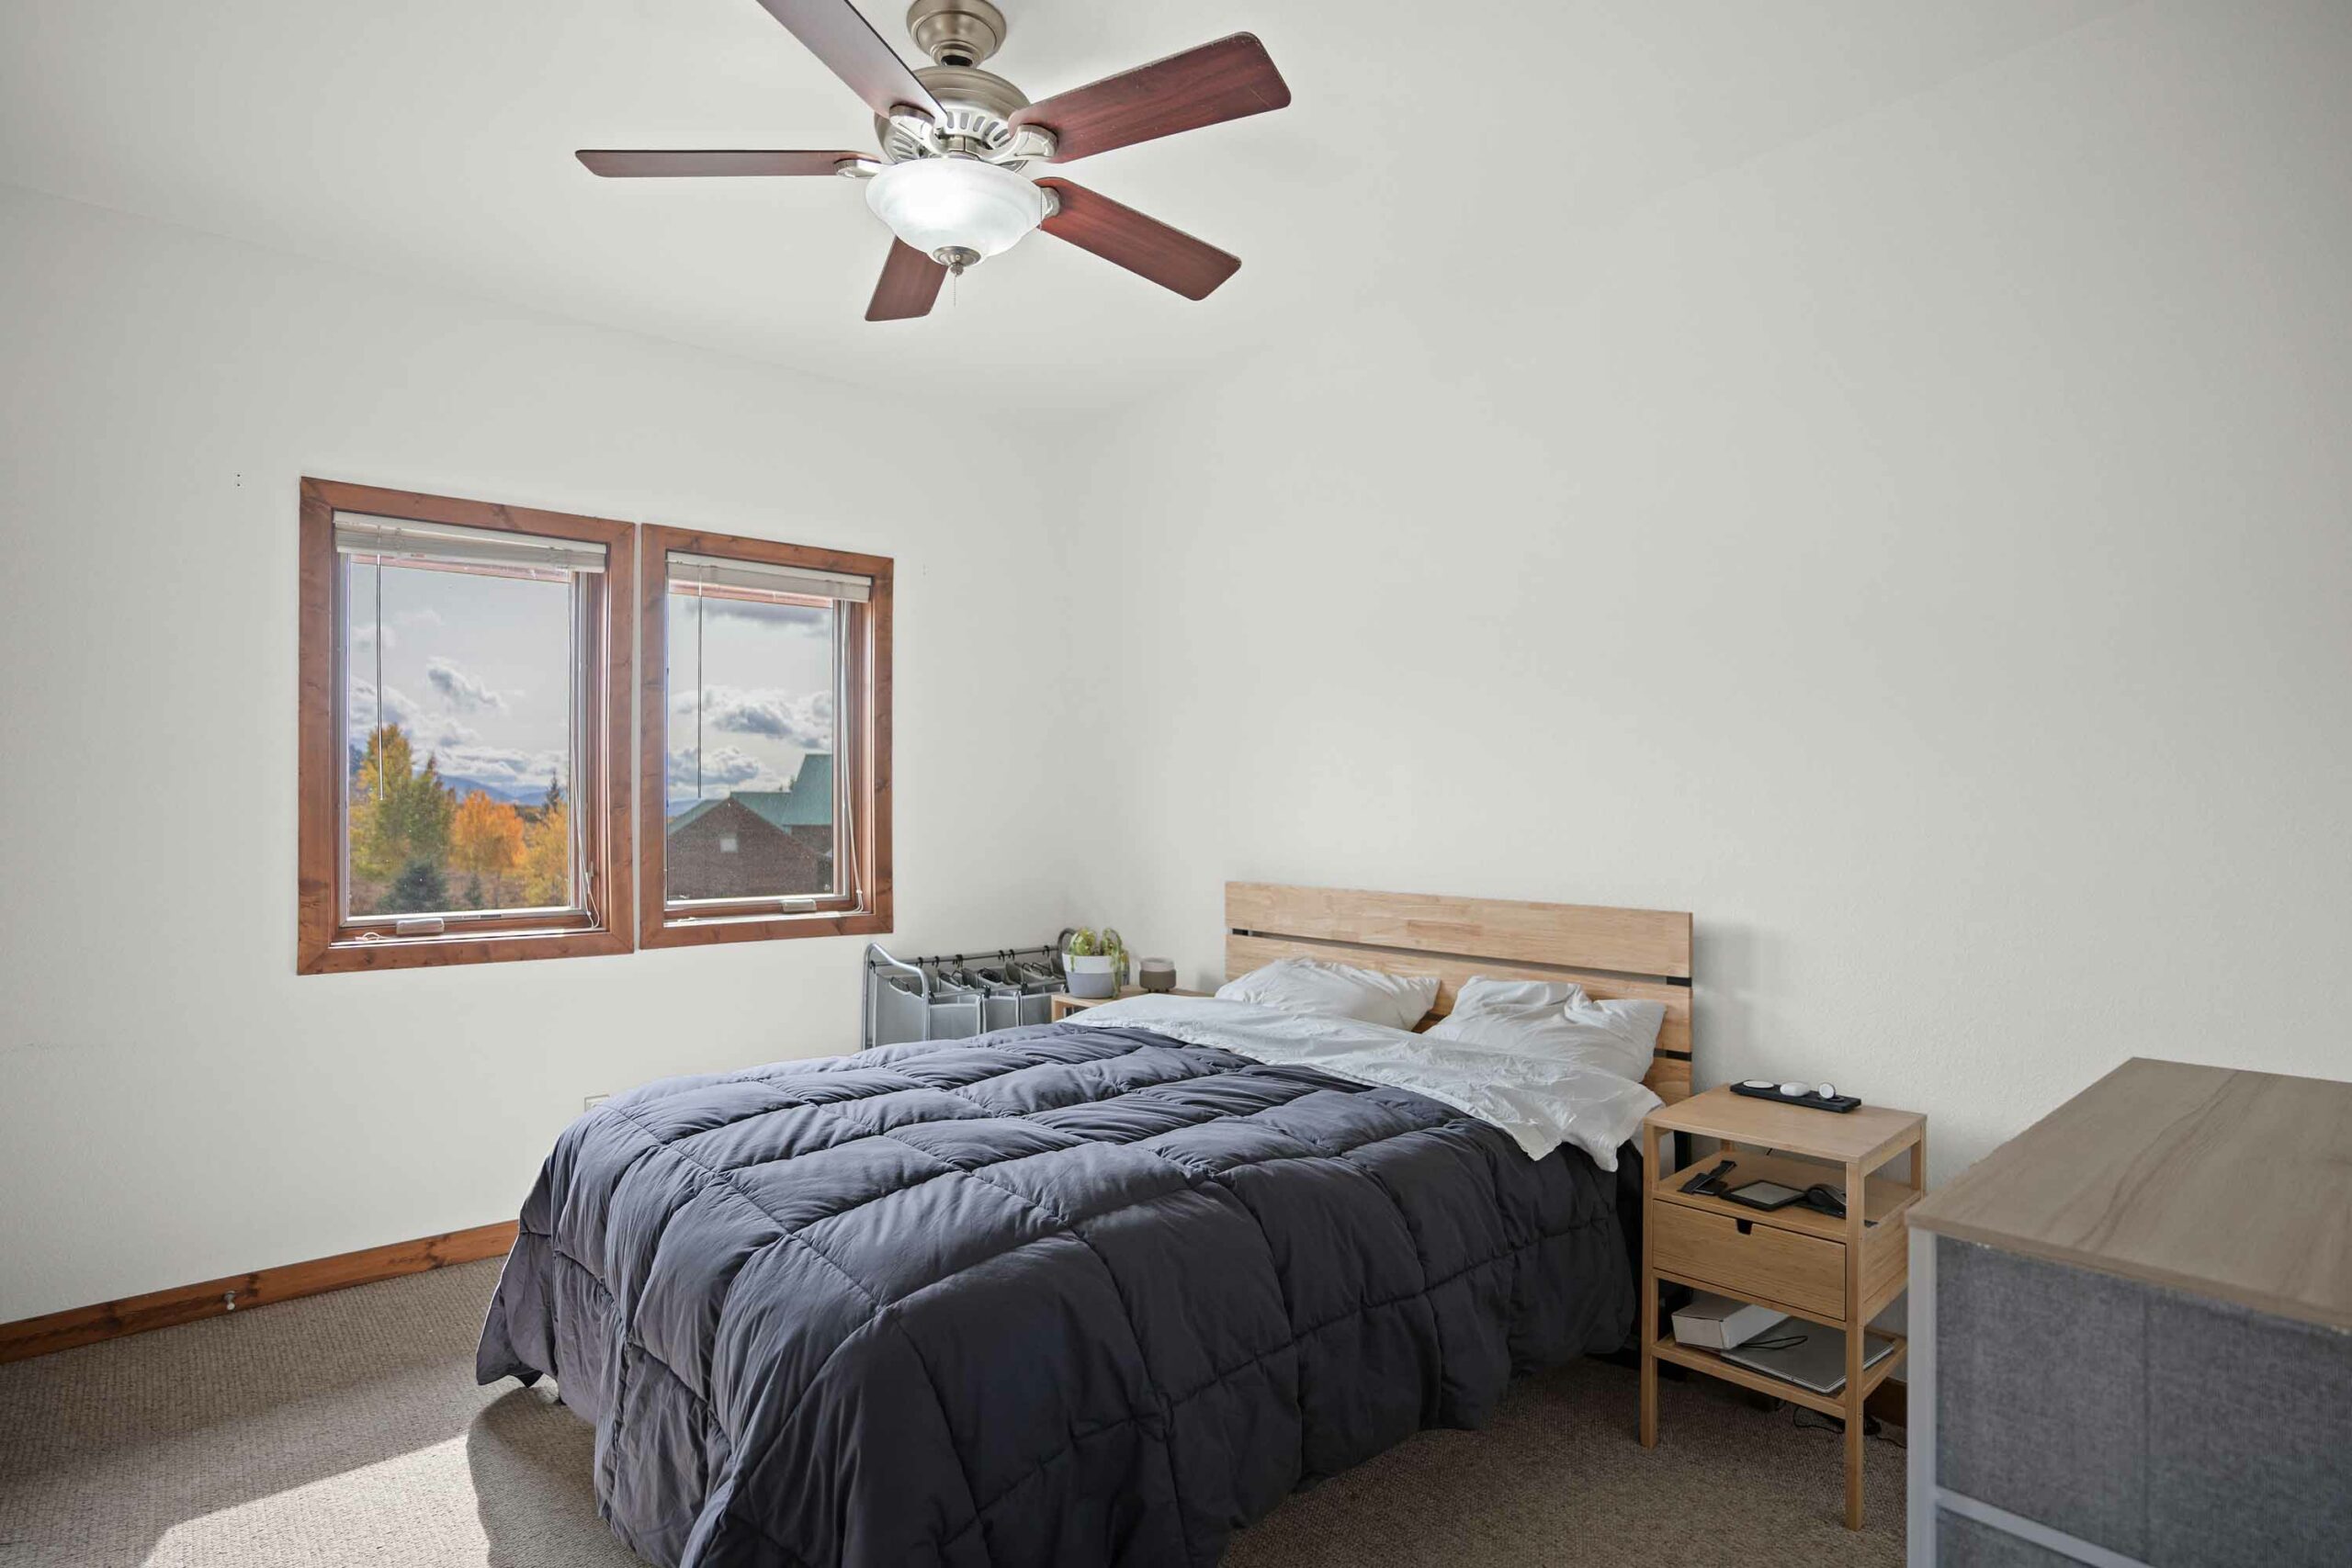 45 Creek Cove Crested Butte, CO -Garage Apartment Bedroom 1